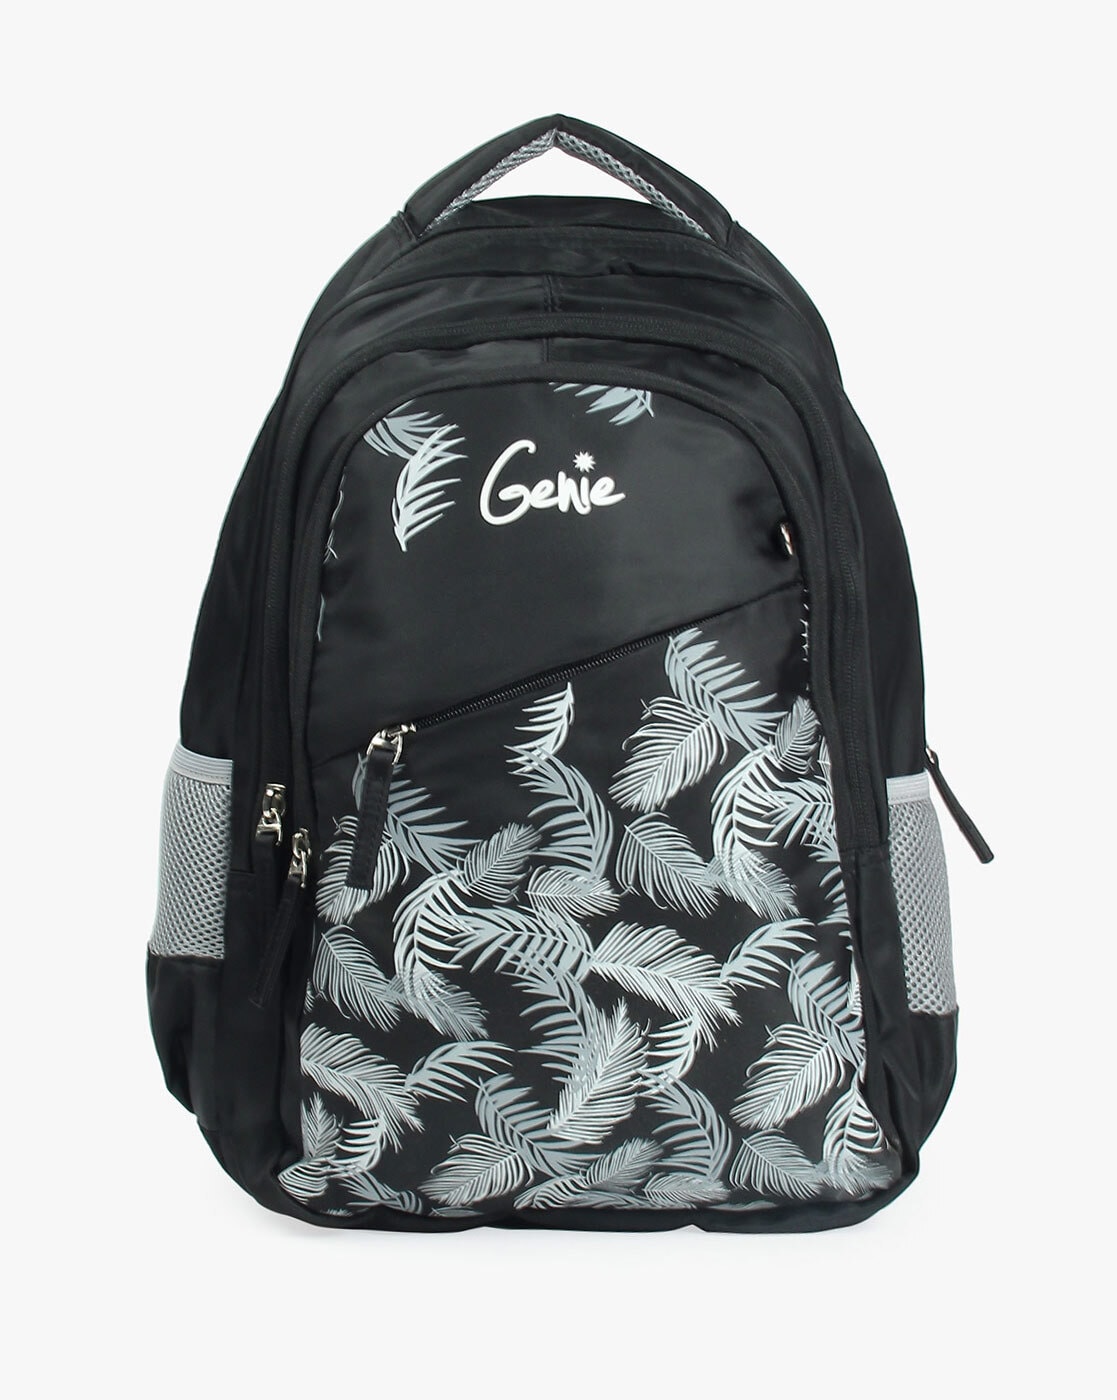 Buy Genie Evelyn Black in Color Laptop Backpack 19 inch at Amazonin